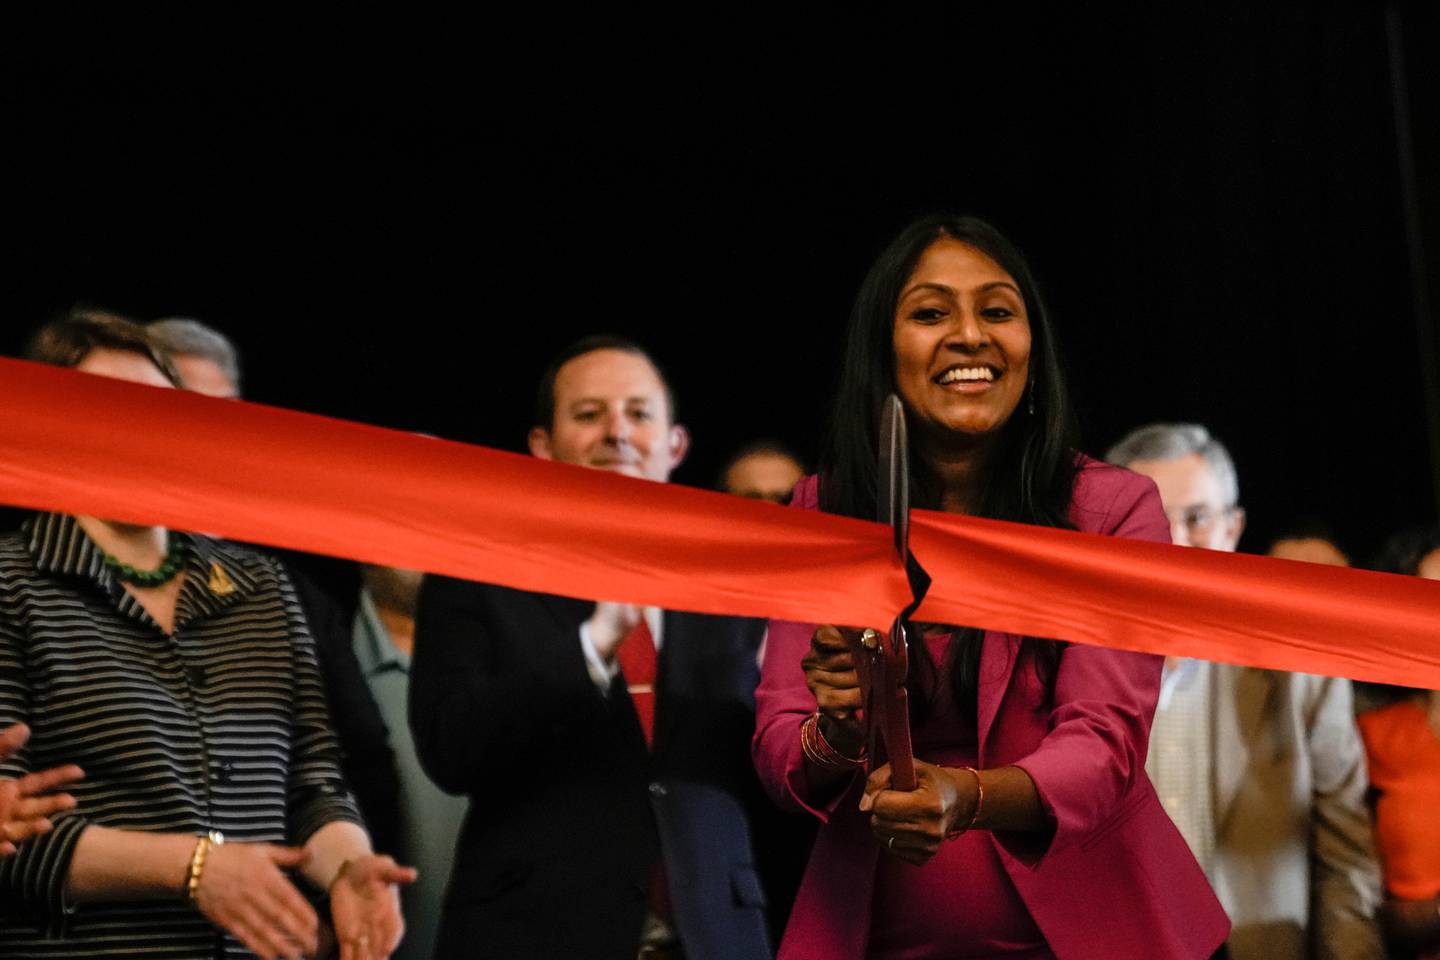 Krish O'Mara Vignarajah, President and CEO of the Lutheran Immigration and Refugee Service, cuts the ribbon at their opening ceremony.